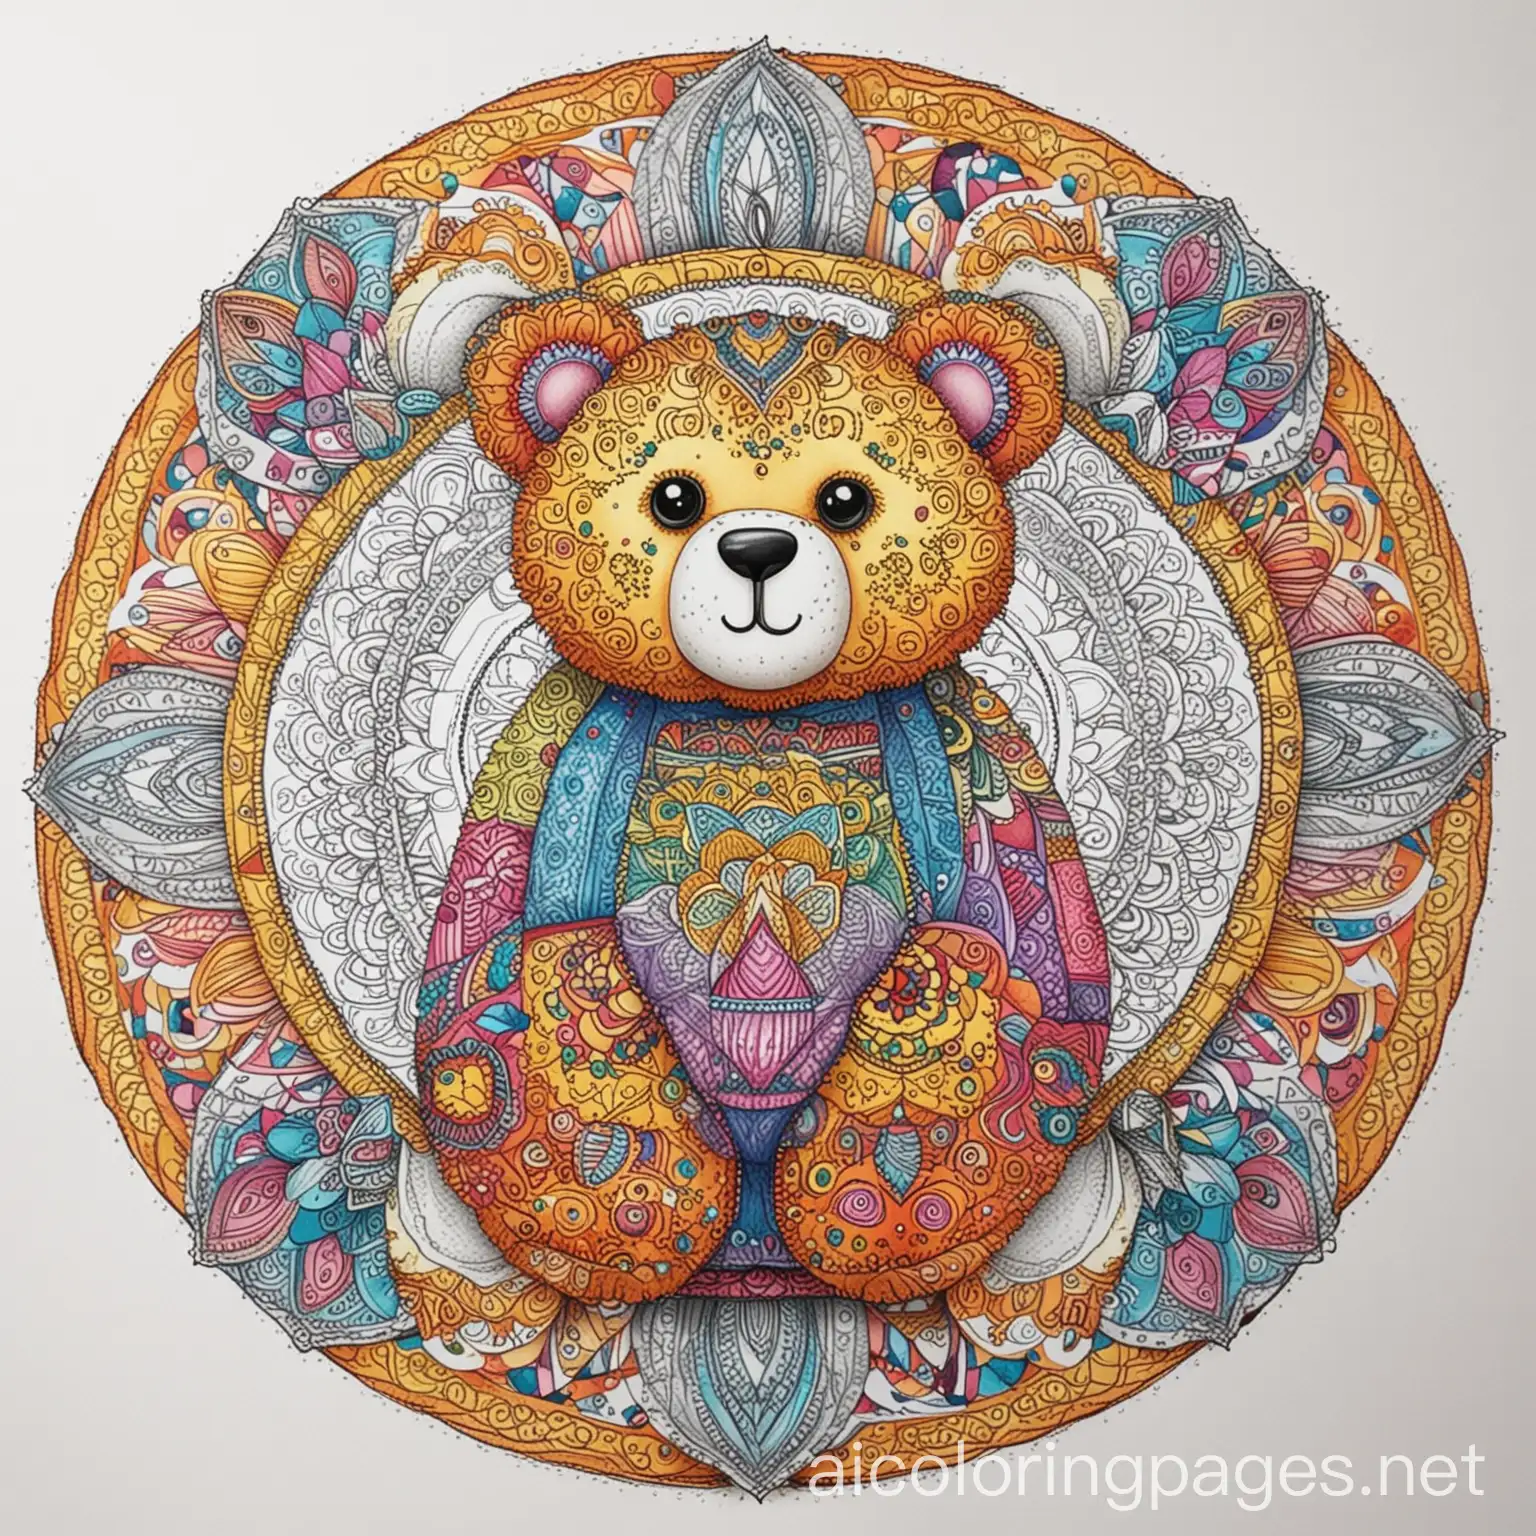 Colorful-Mandala-Teddy-Bear-Picture-Vibrant-Line-Art-Coloring-Page